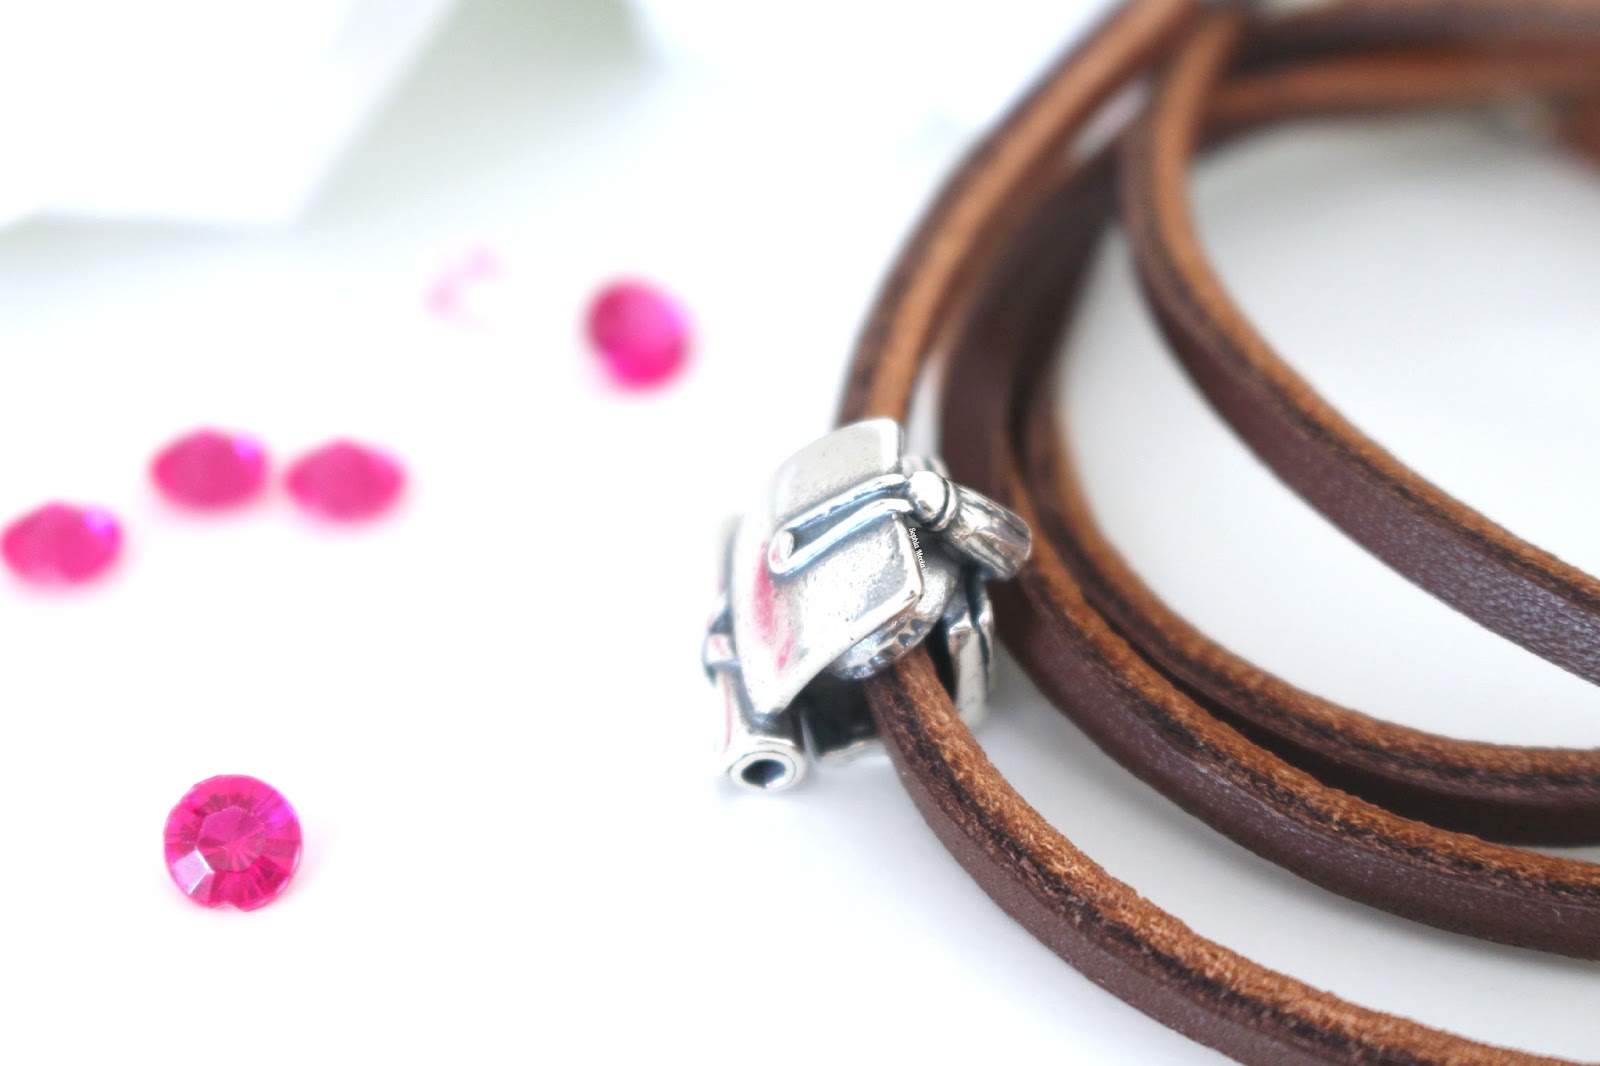 Feeling the love with the Trollbeads leather bracelet and